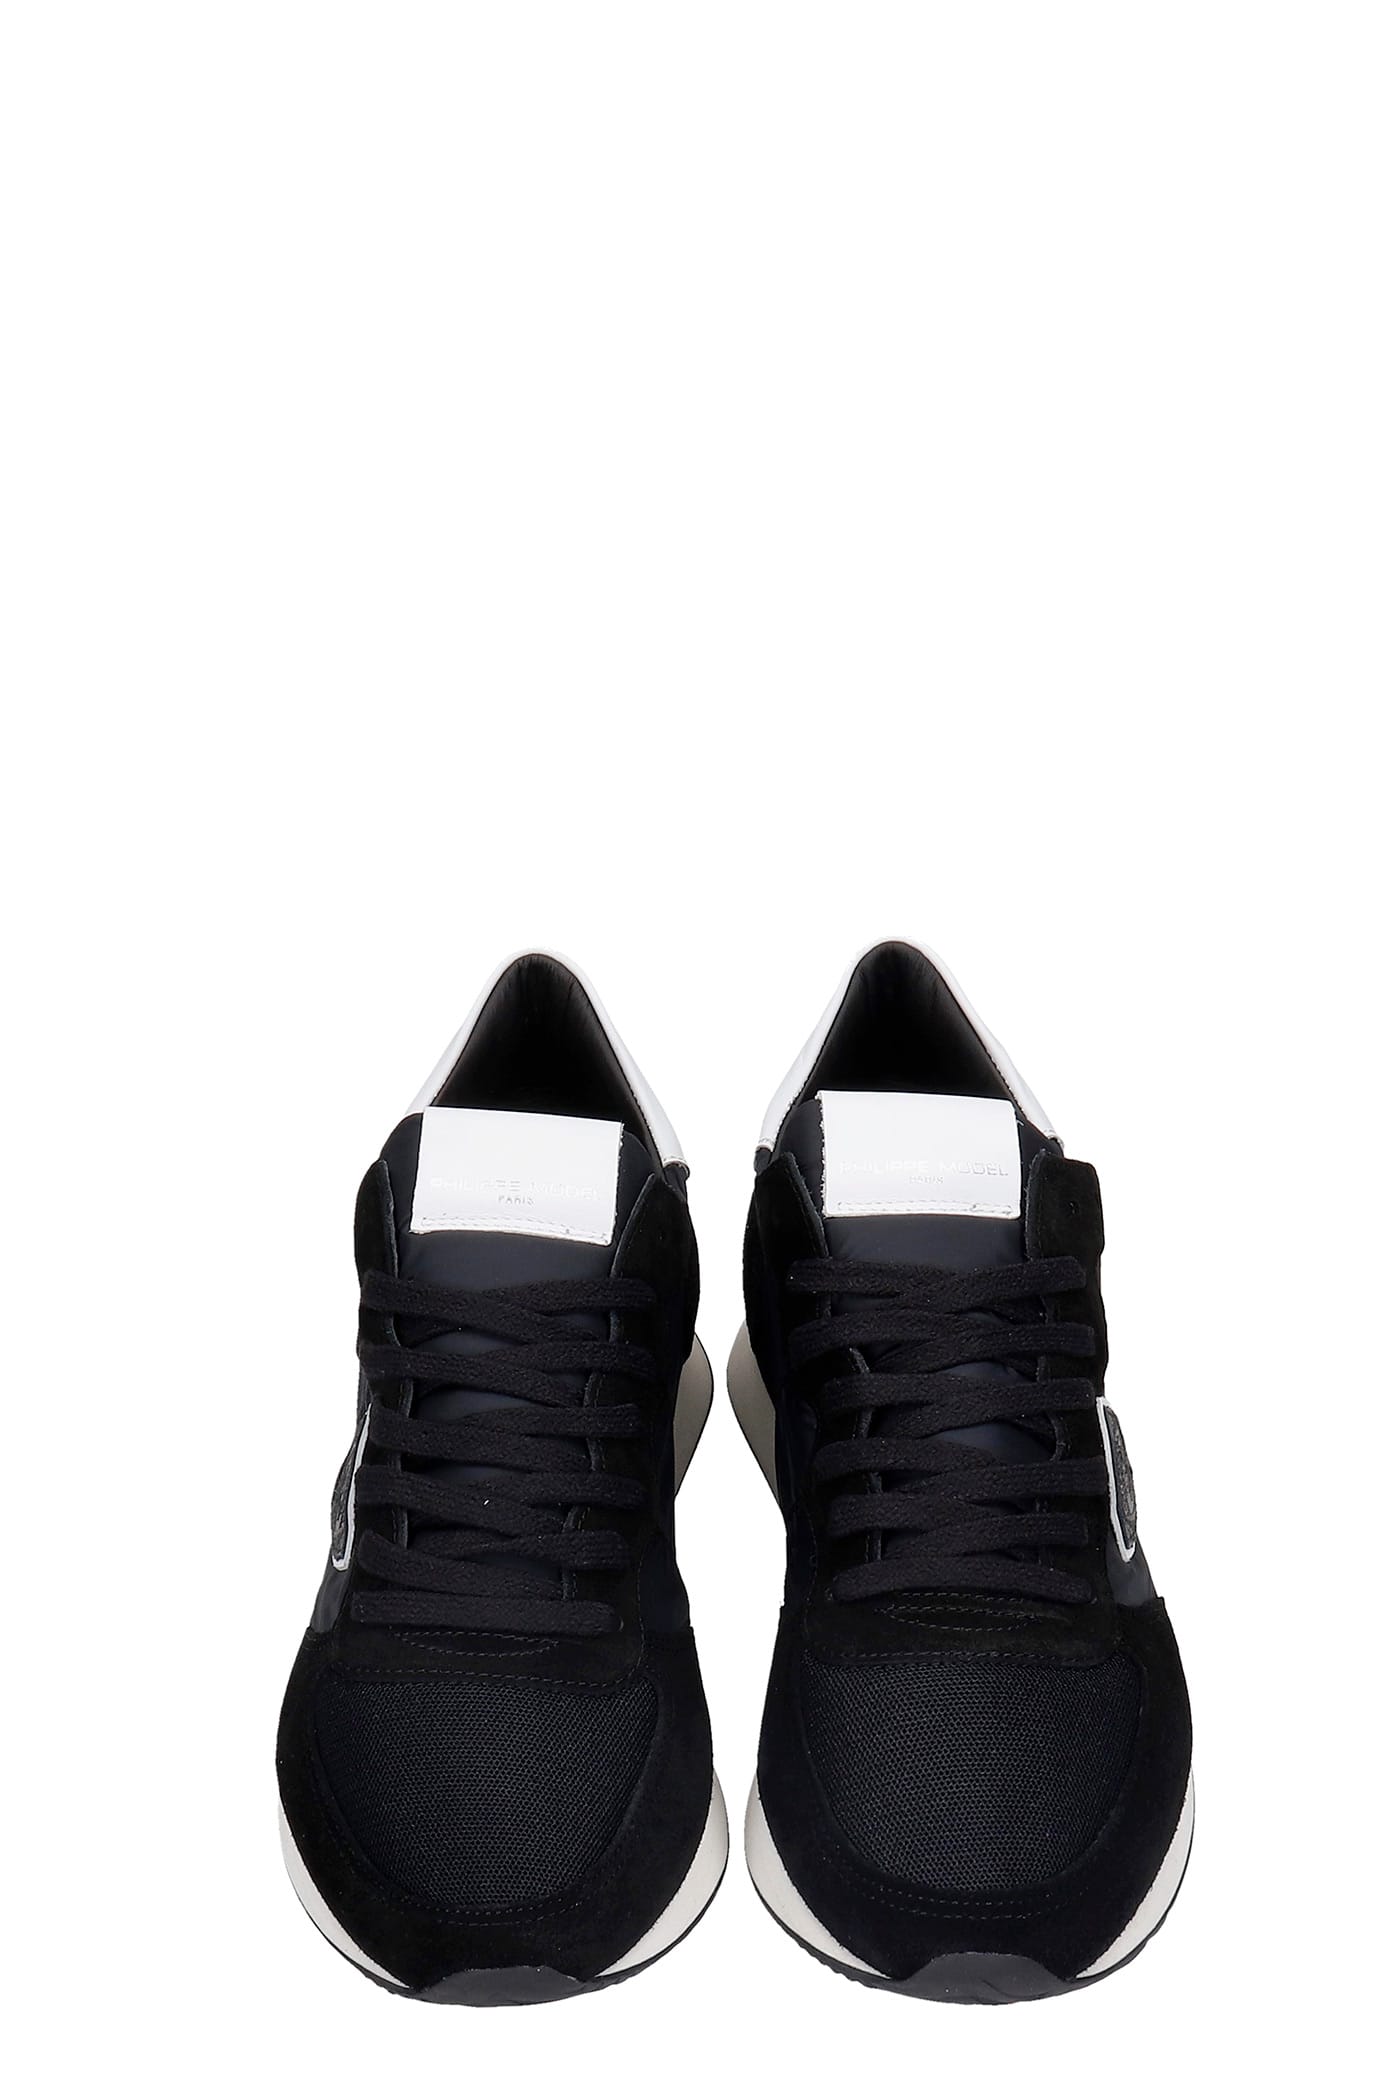 Shop Philippe Model Trpx Sneakers In Black Suede And Fabric